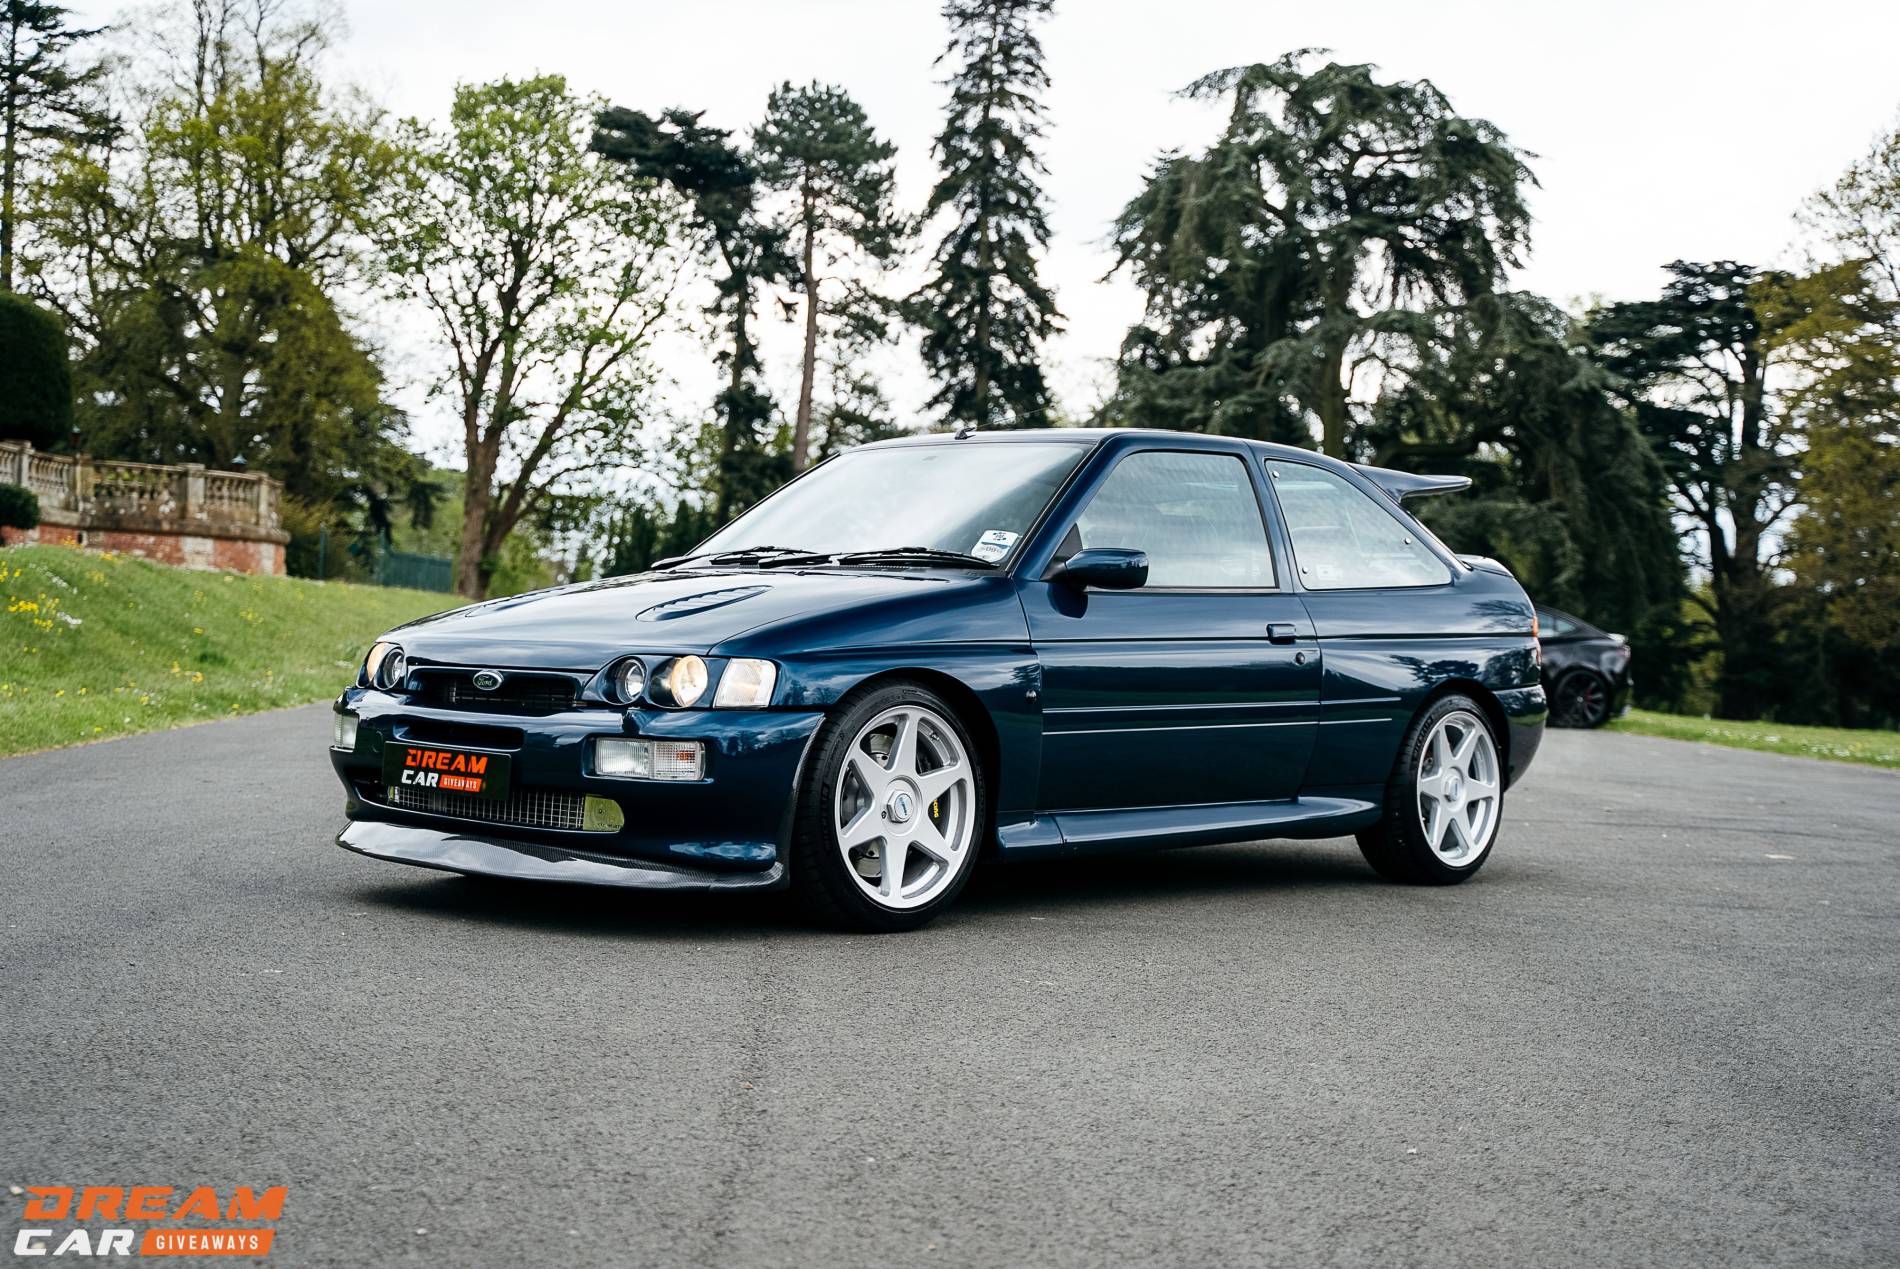 Ford Escort RS Cosworth & £1000